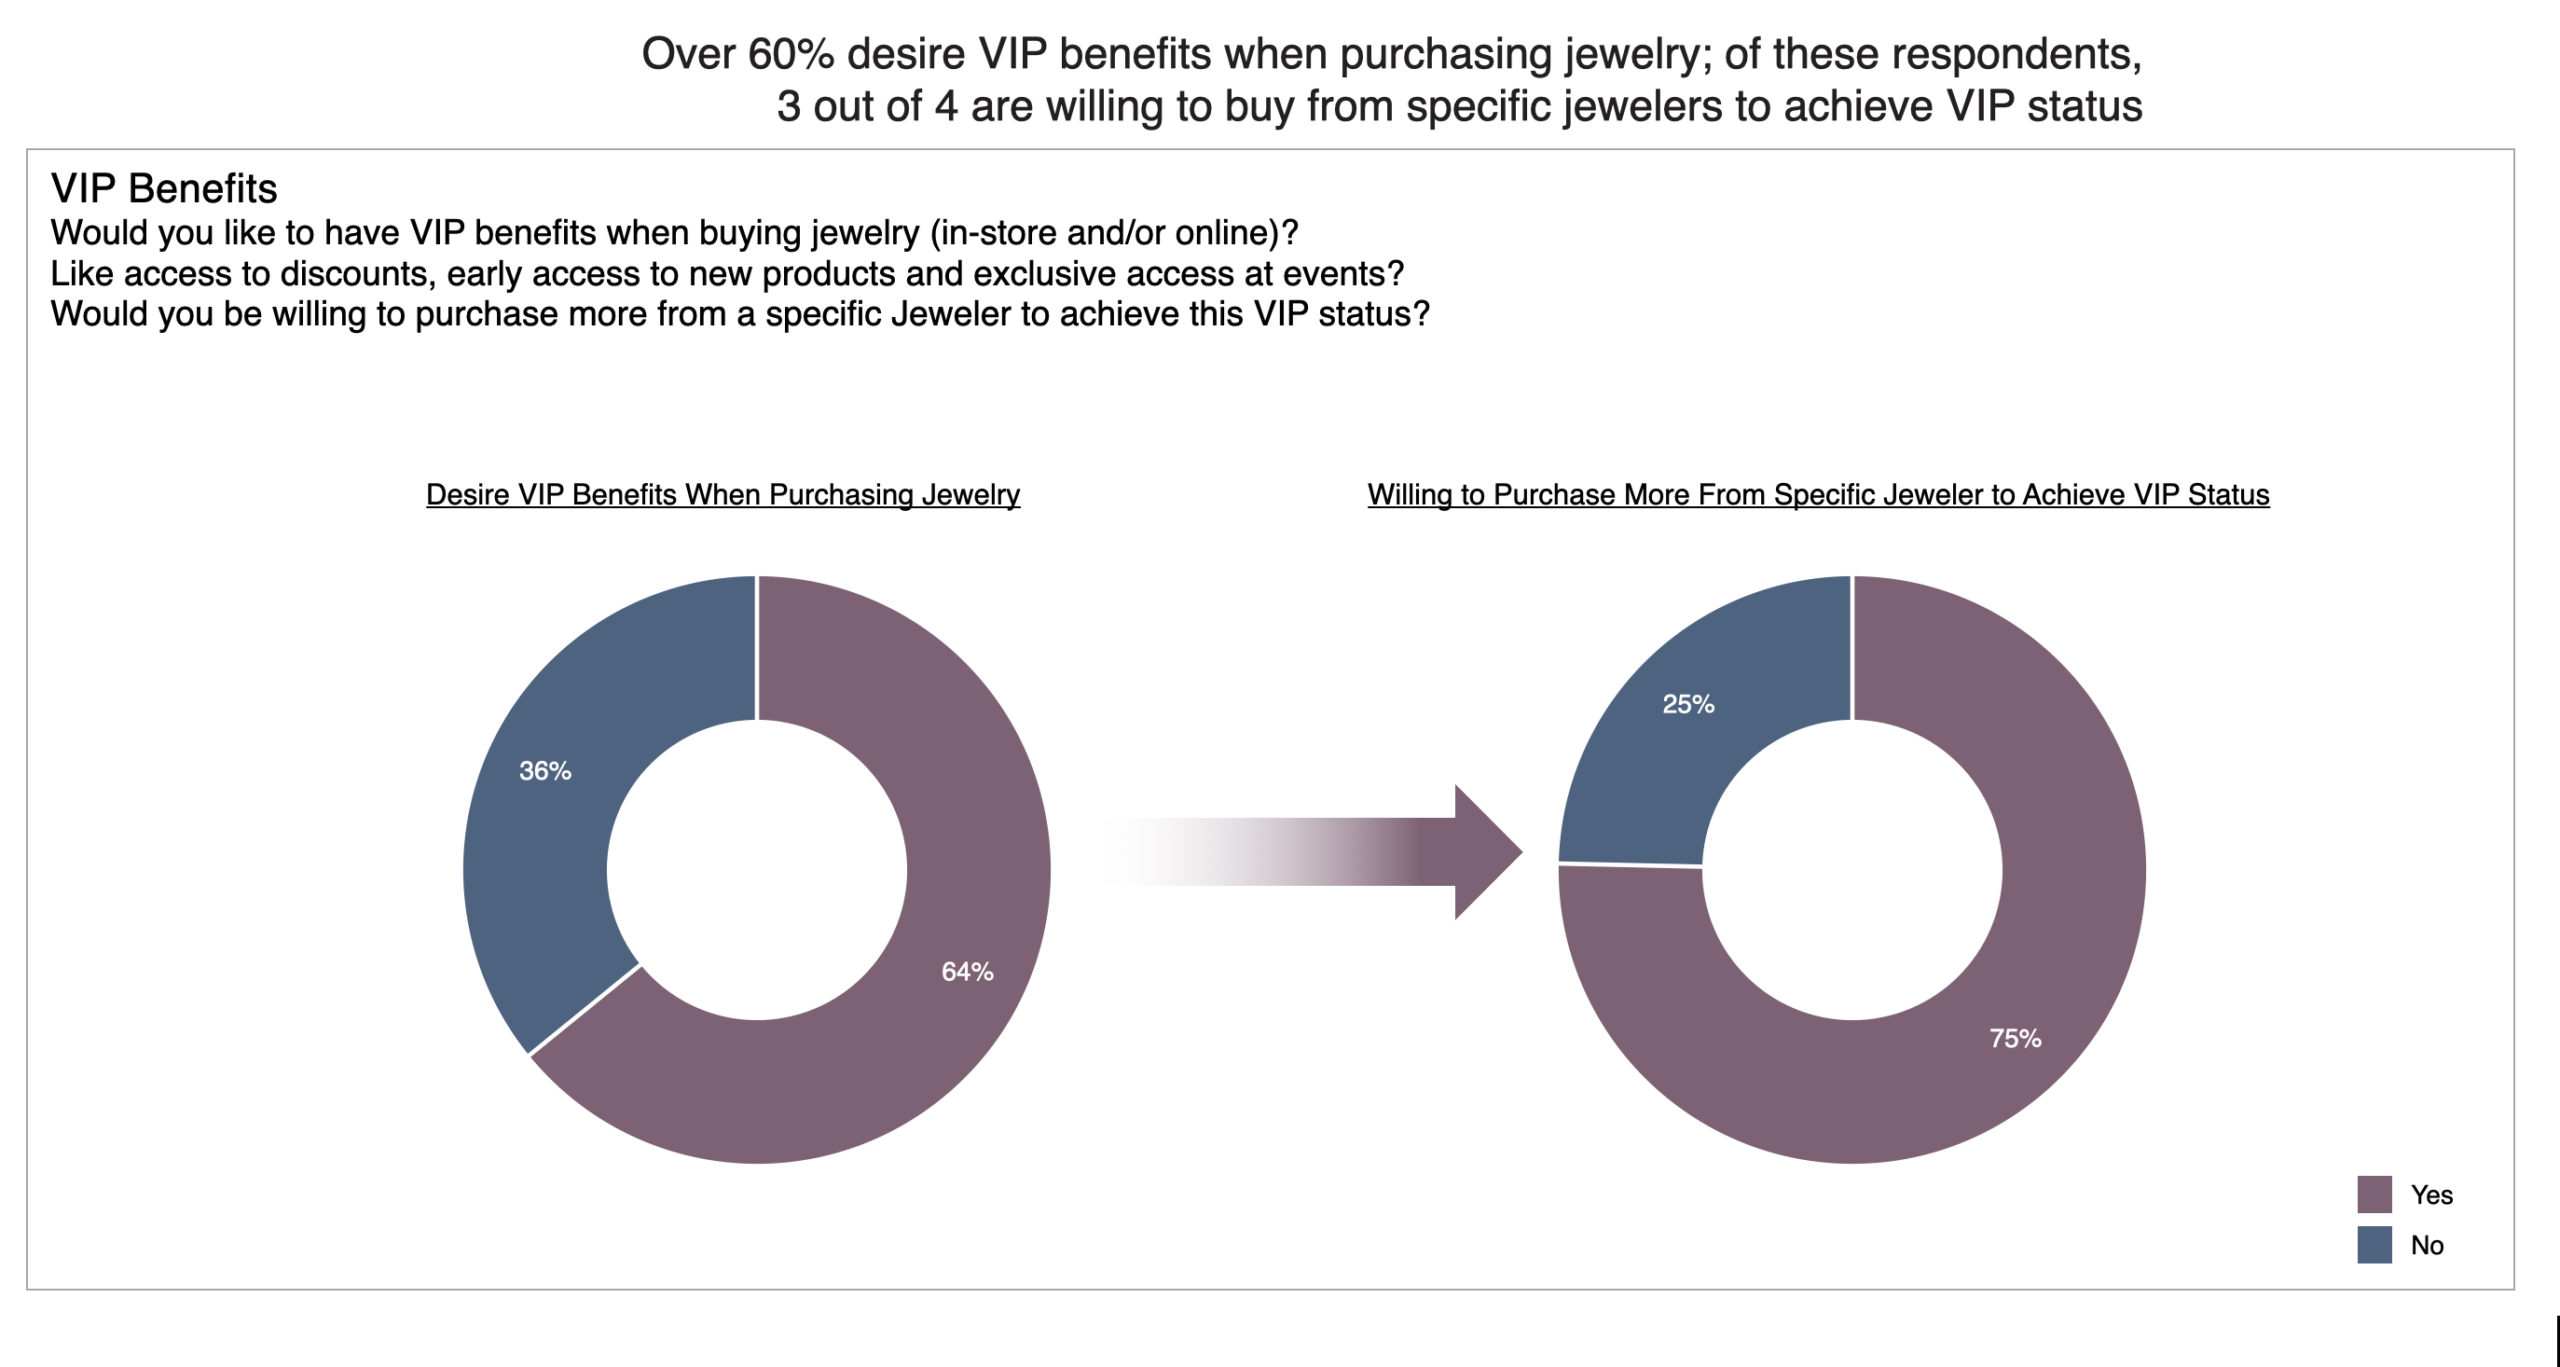 Consumer Research Study Sheds Light on What Makes a Jewelry Customer Buy